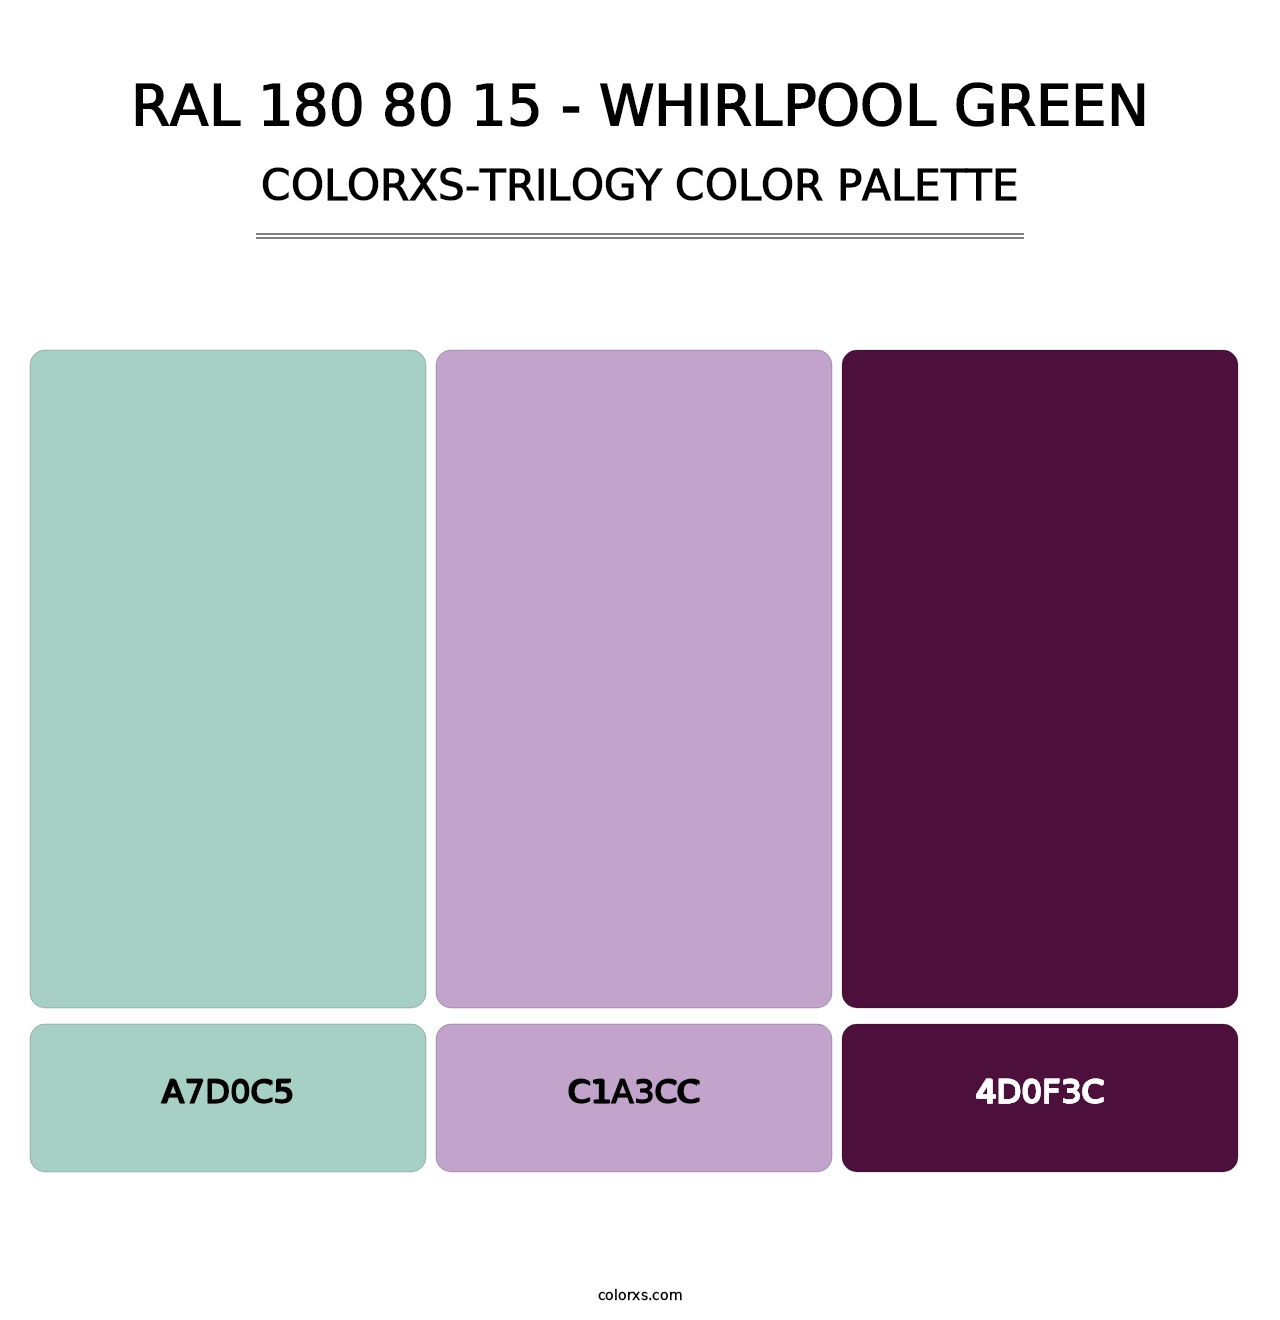 RAL 180 80 15 - Whirlpool Green - Colorxs Trilogy Palette